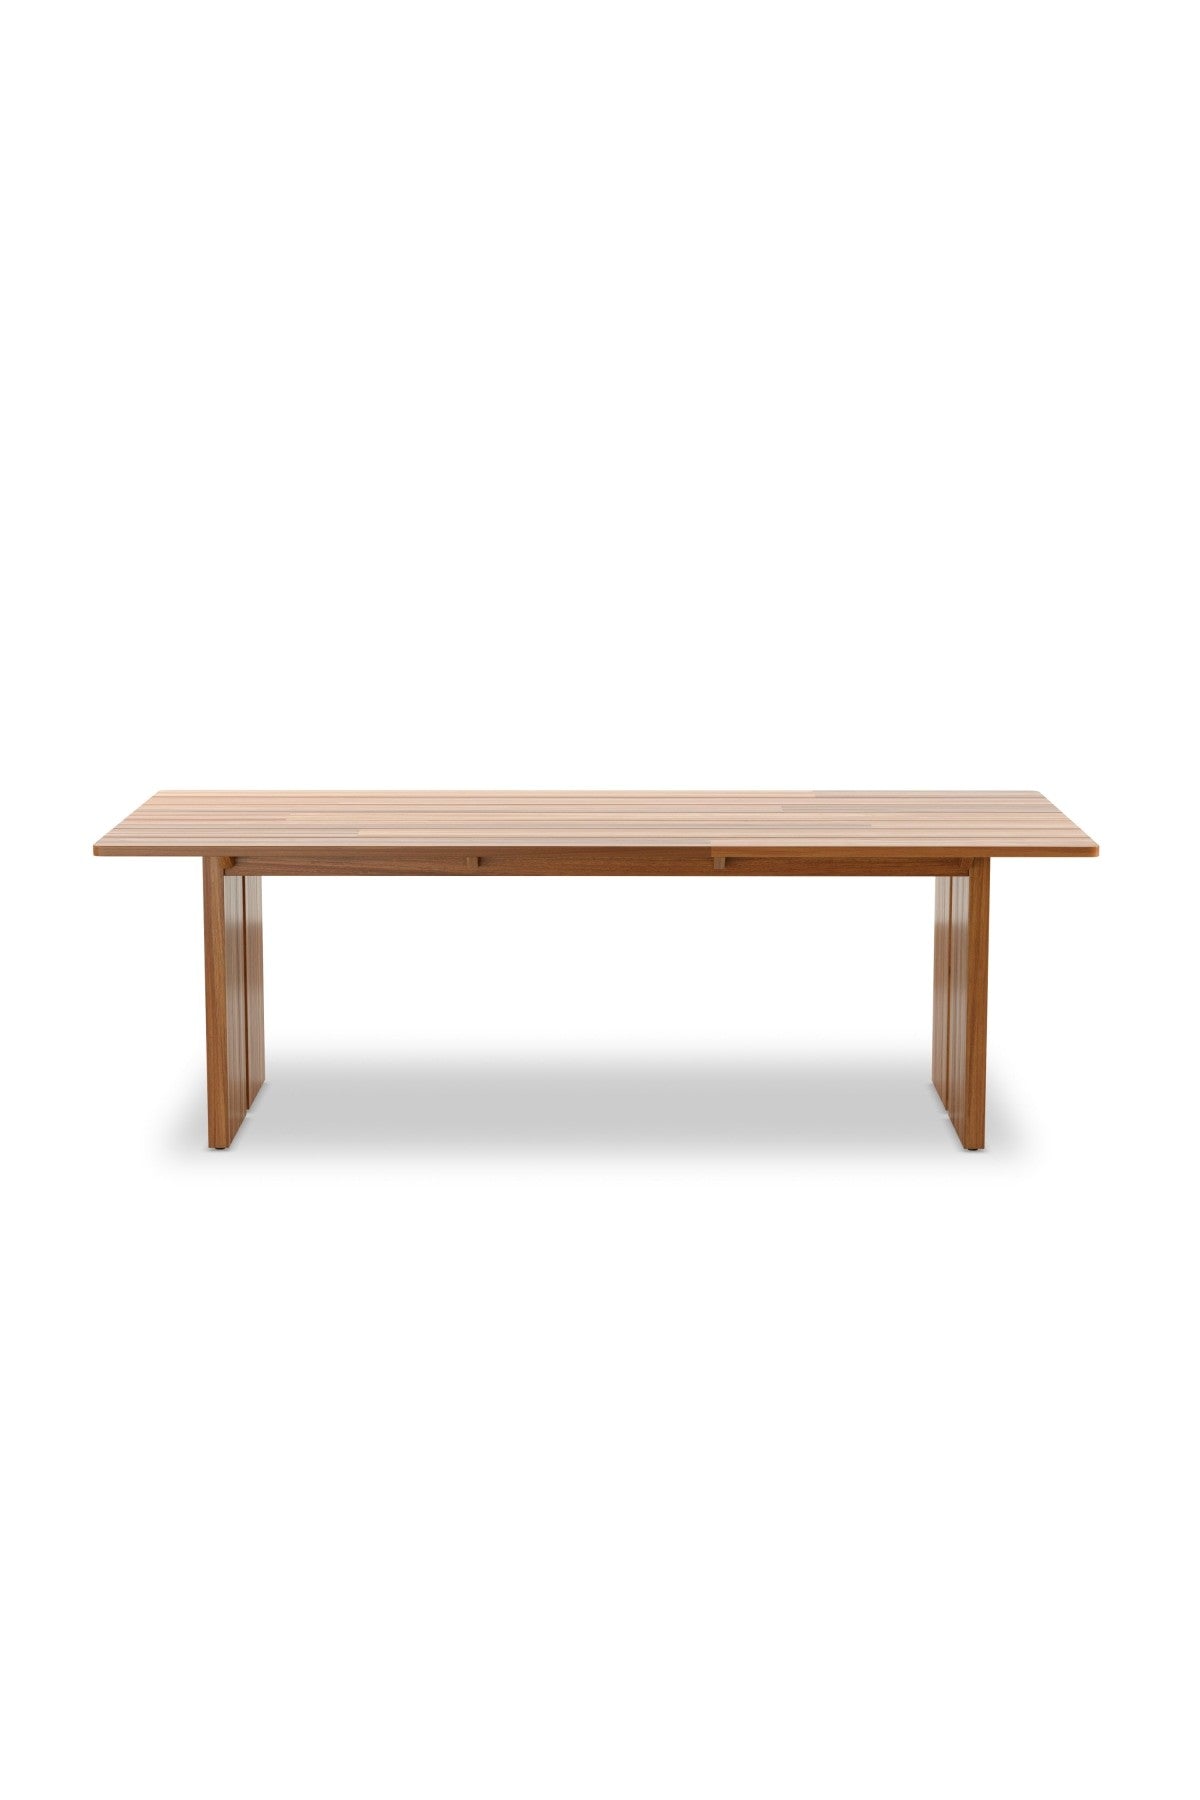 Chappy Outdoor Dining Table - 2 Sizes